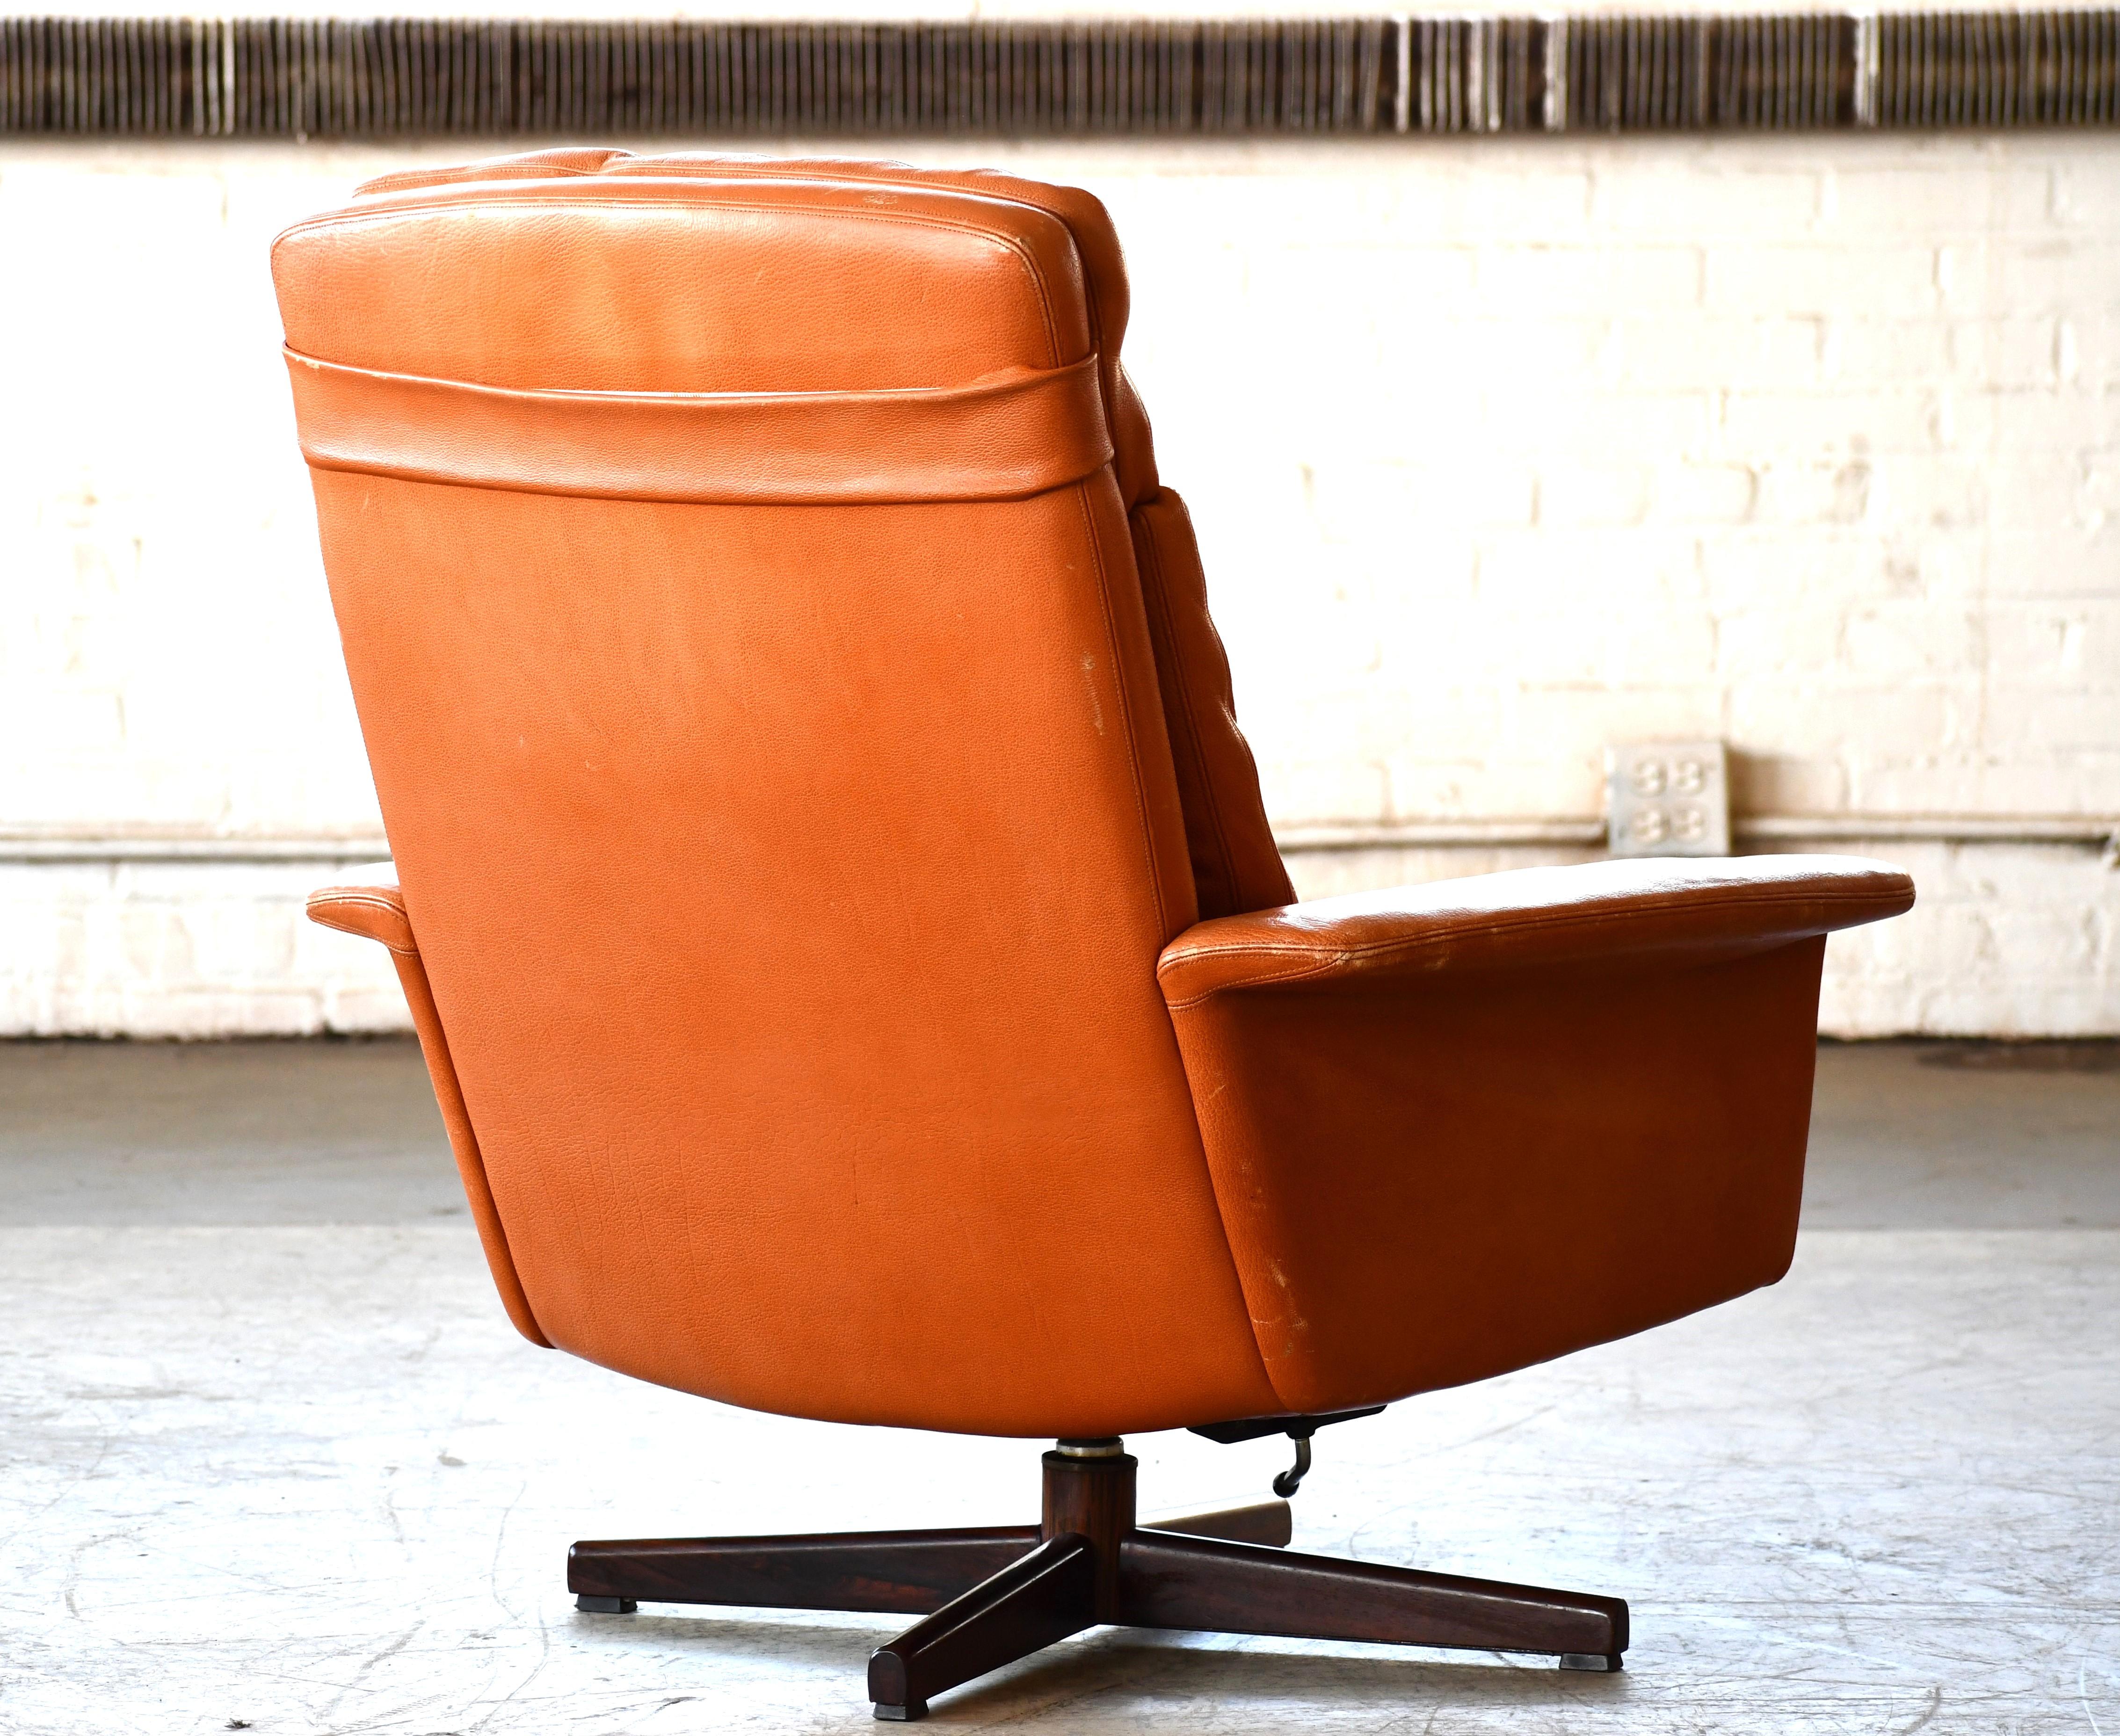 Danish High Back Swivel Lounge Chair with Ottoman in Cognac Leather, 1970's For Sale 2